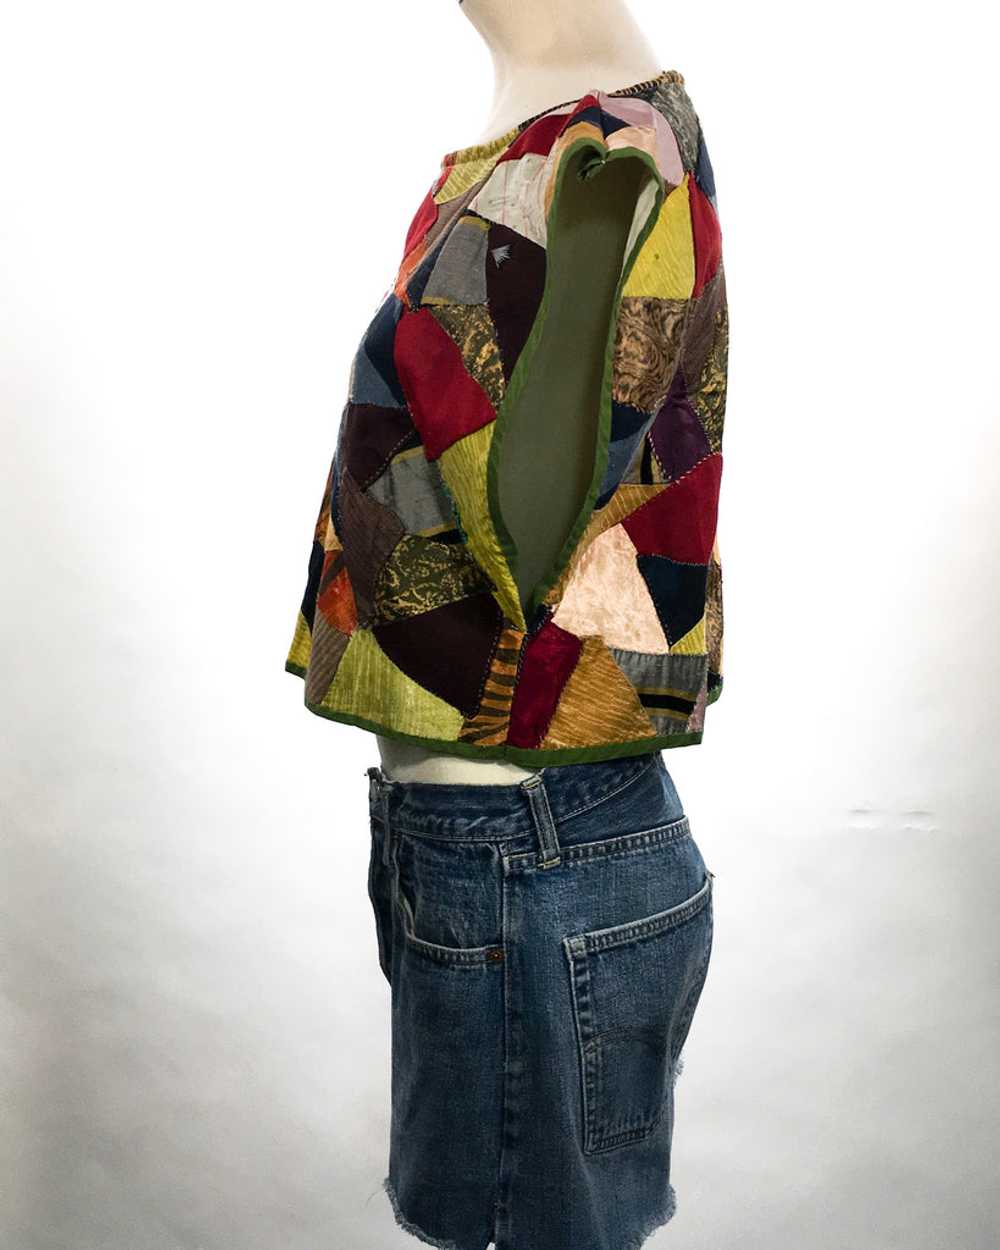 Handmade Crop Top from 1940s Quilt - image 4